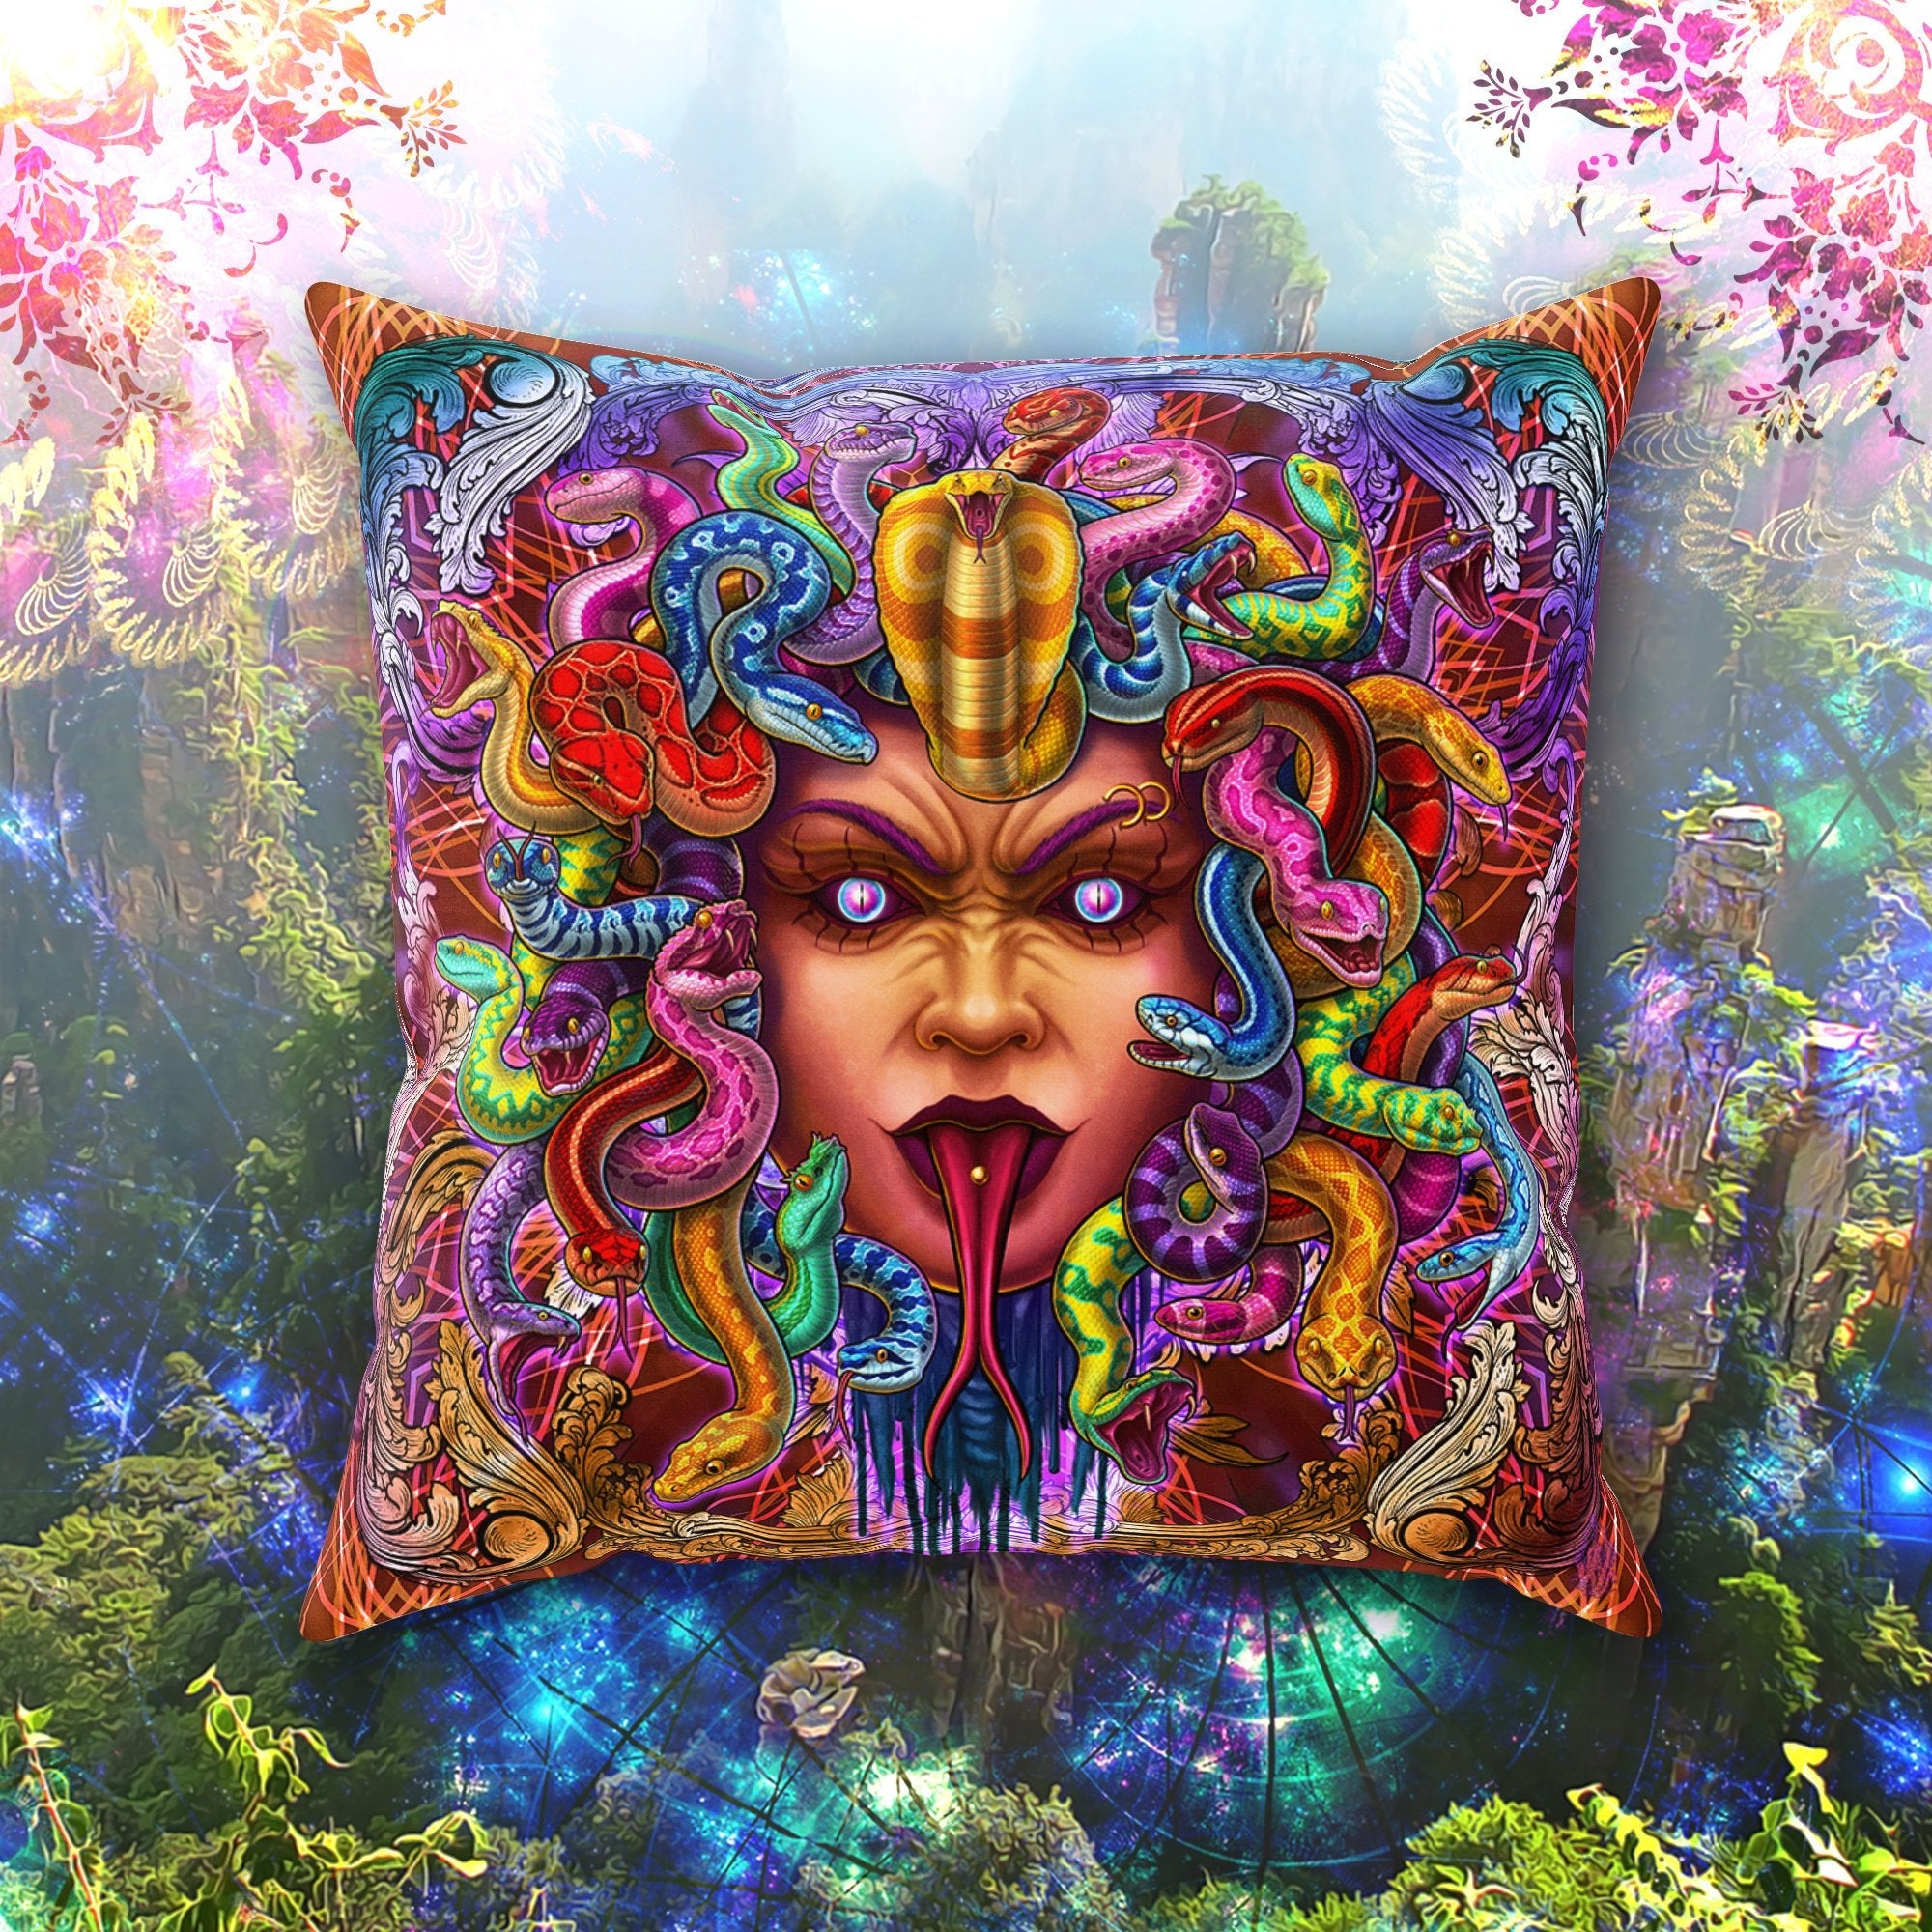 Psychedelic Throw Pillow, Decorative Accent Cushion, Medusa, Indie and Trippy Room Decor, Eclectic Design - Psy Snakes - Abysm Internal